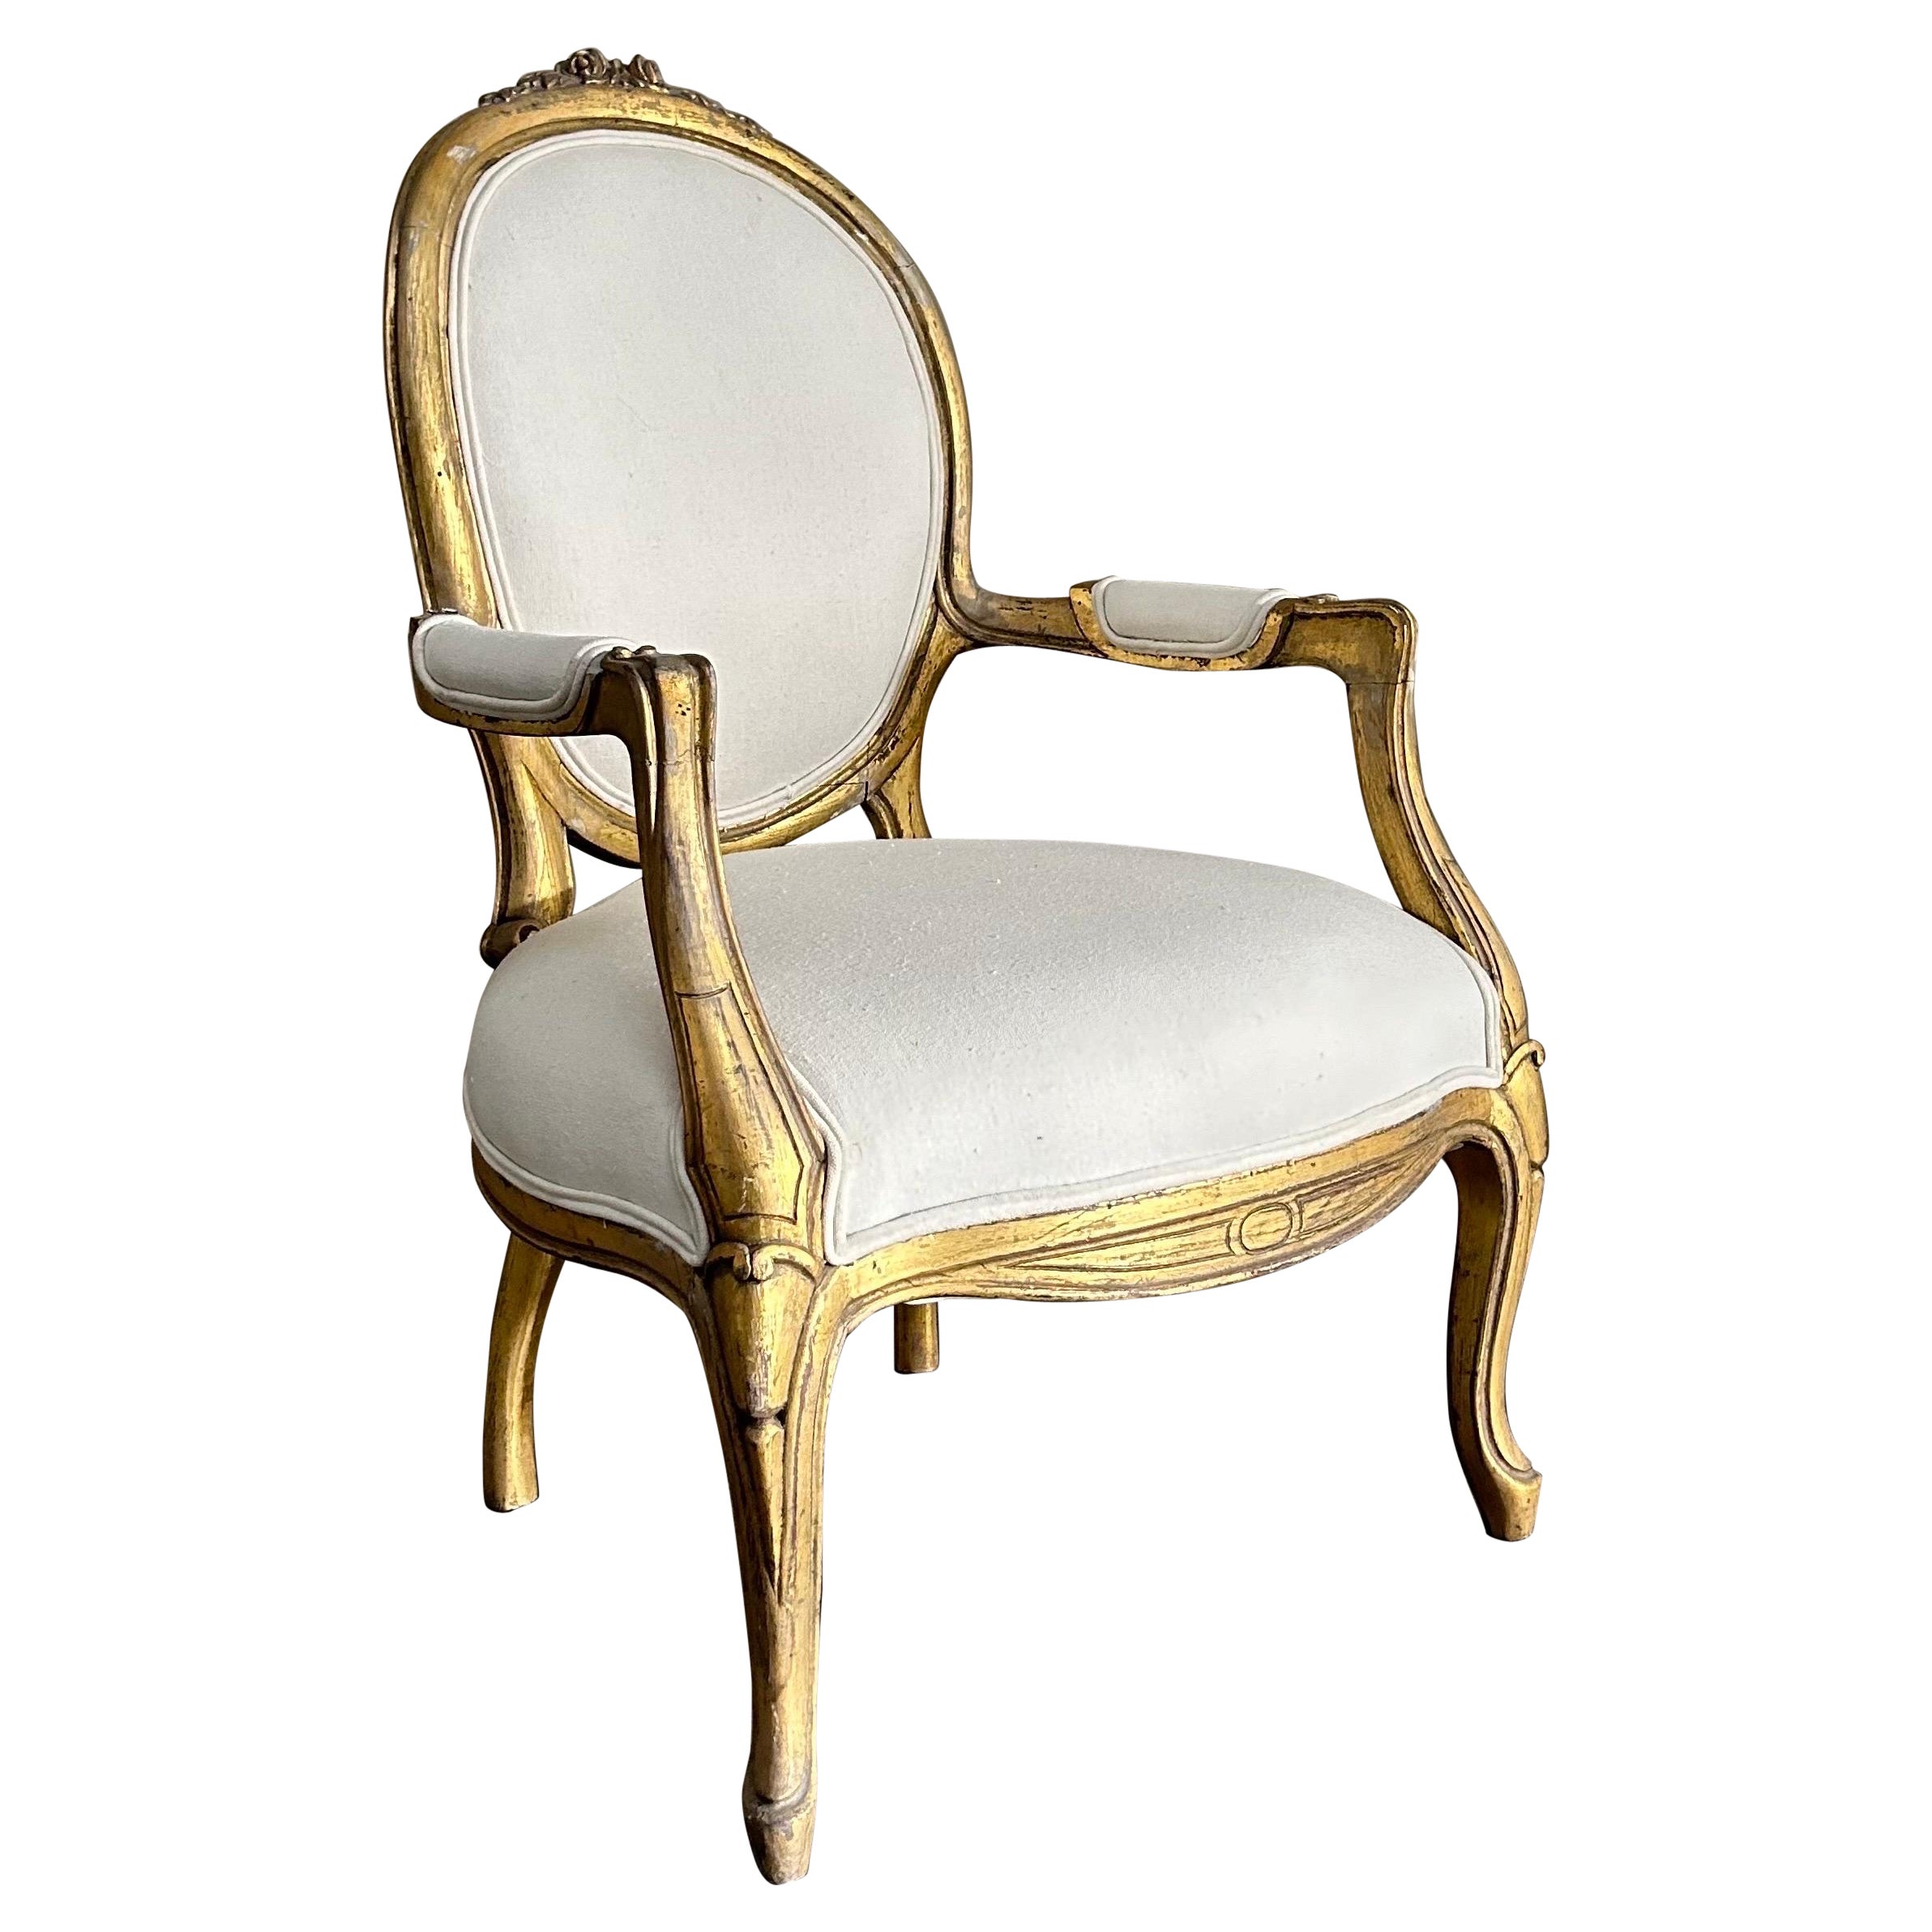 Vintage Louis XV style open arm giltwood chair